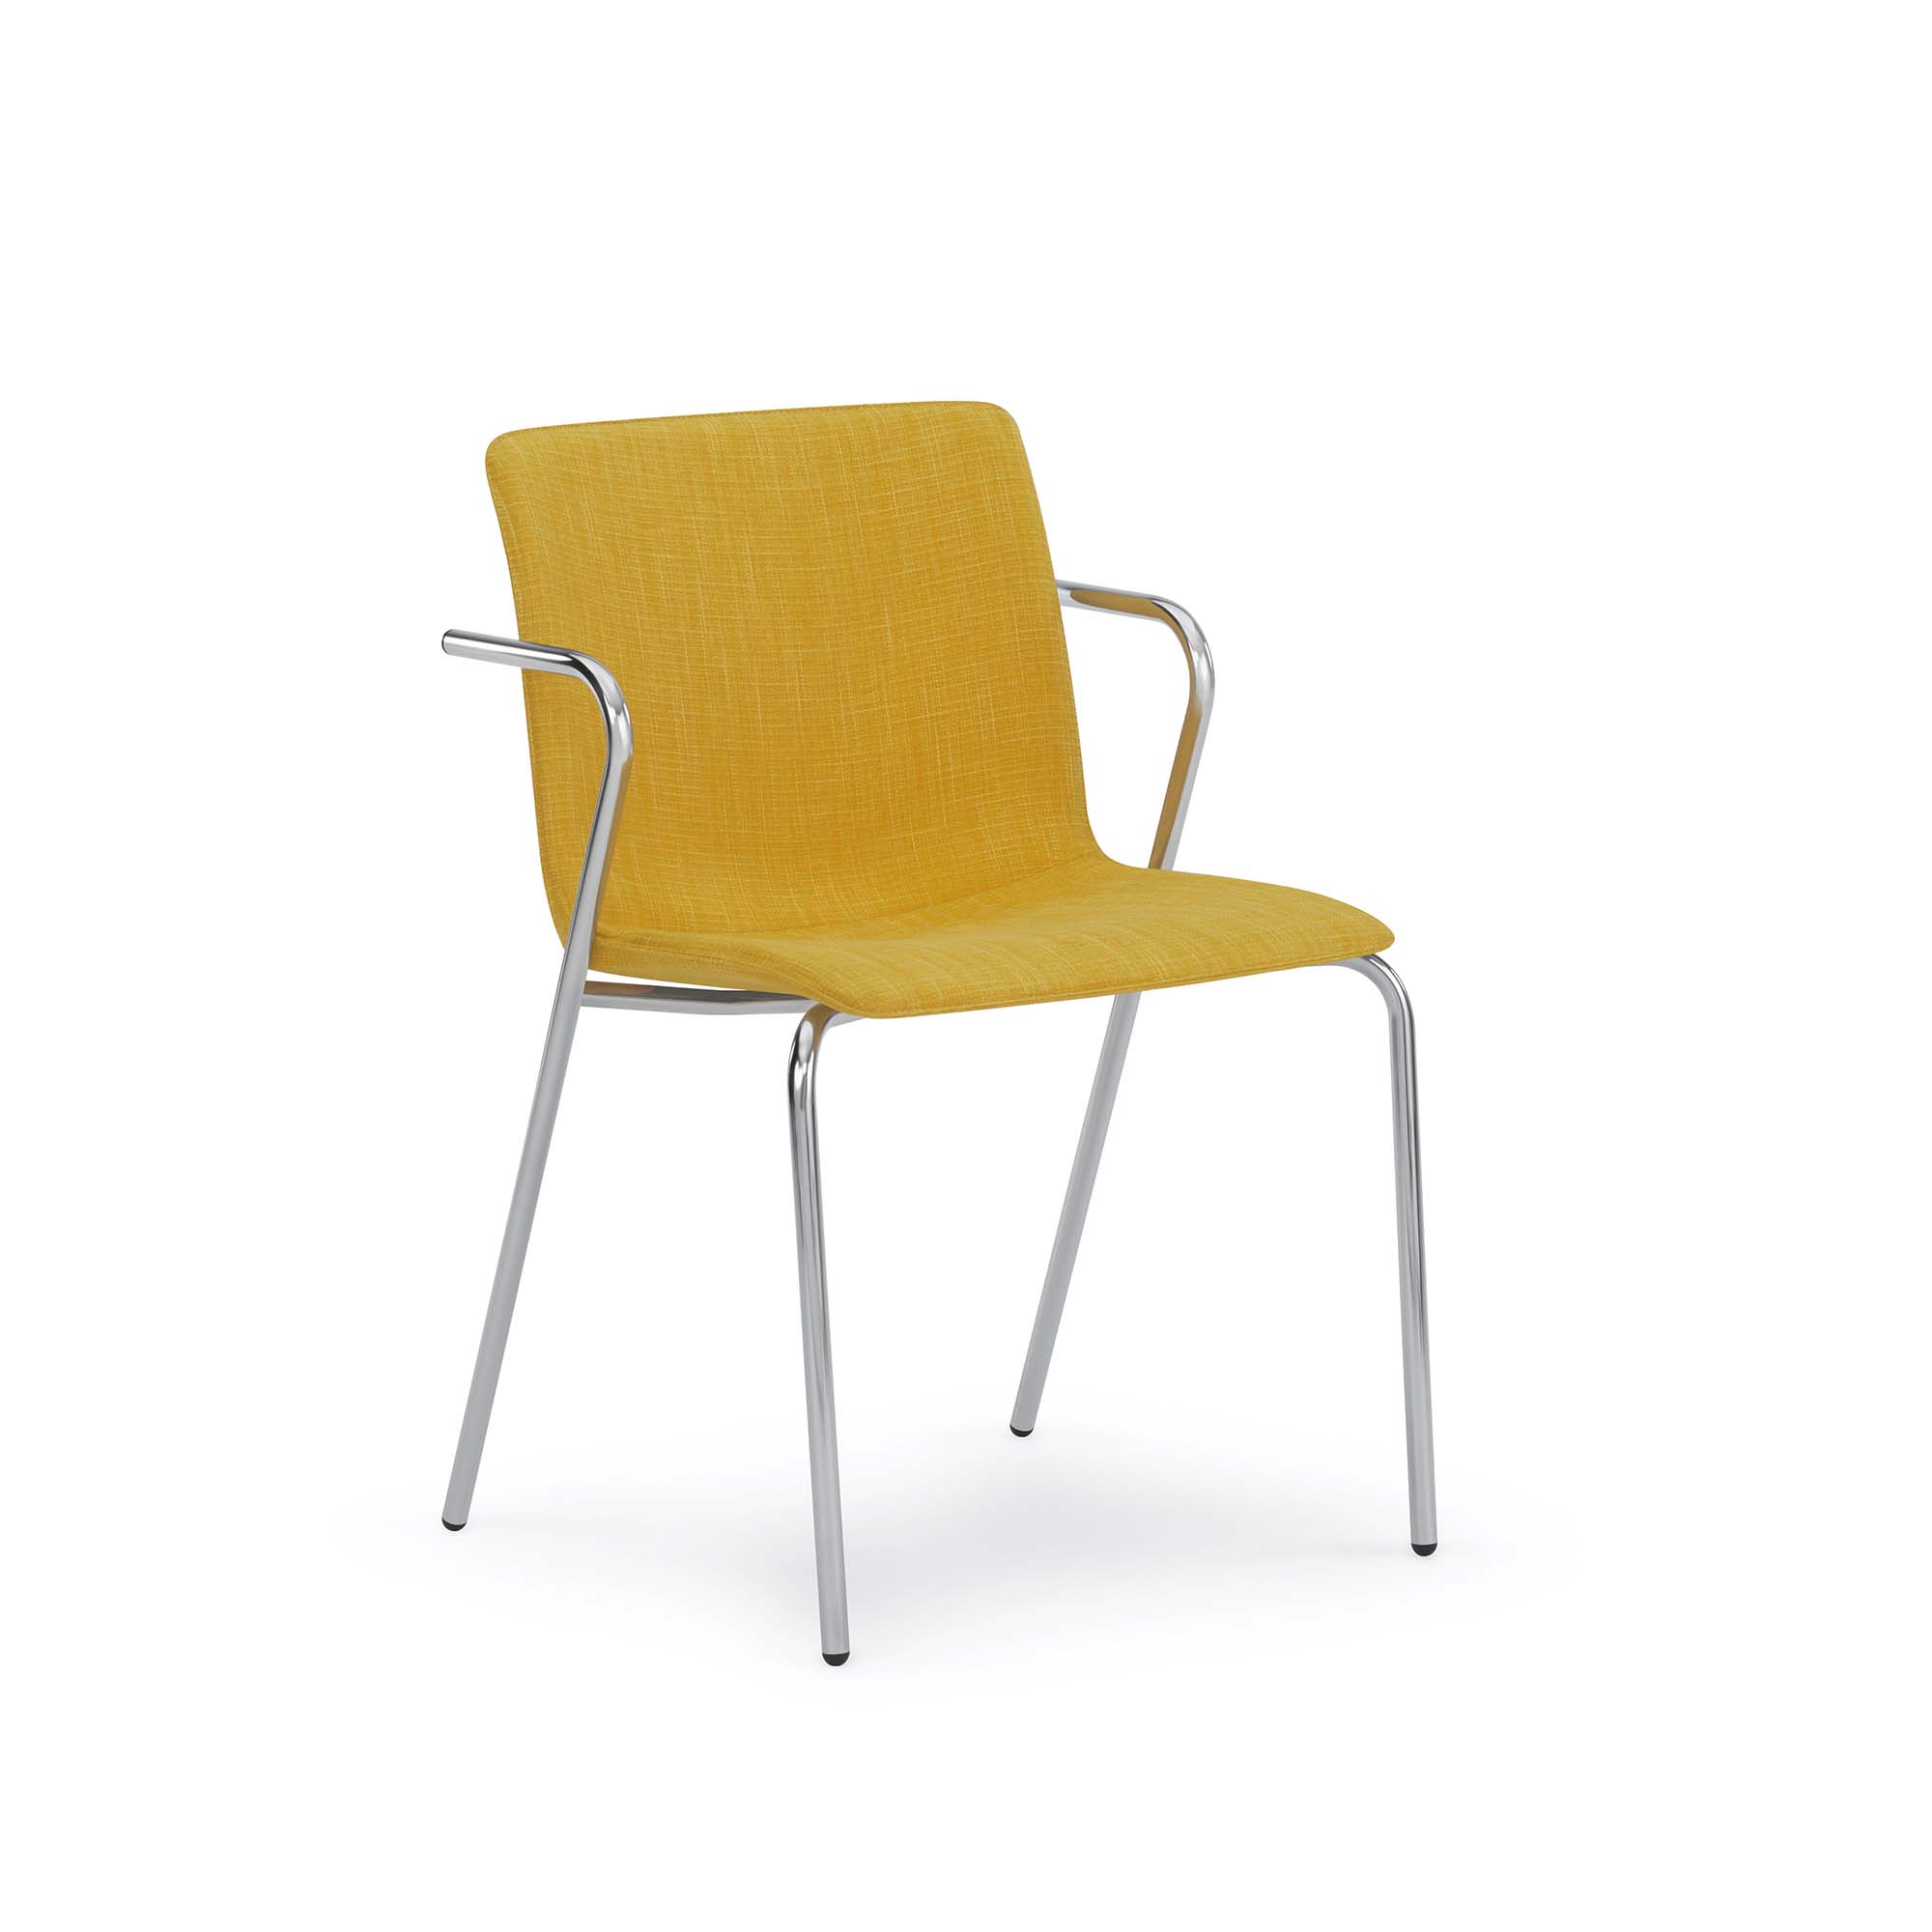 Kitsy Guest Chair, Metal Legs, Arms